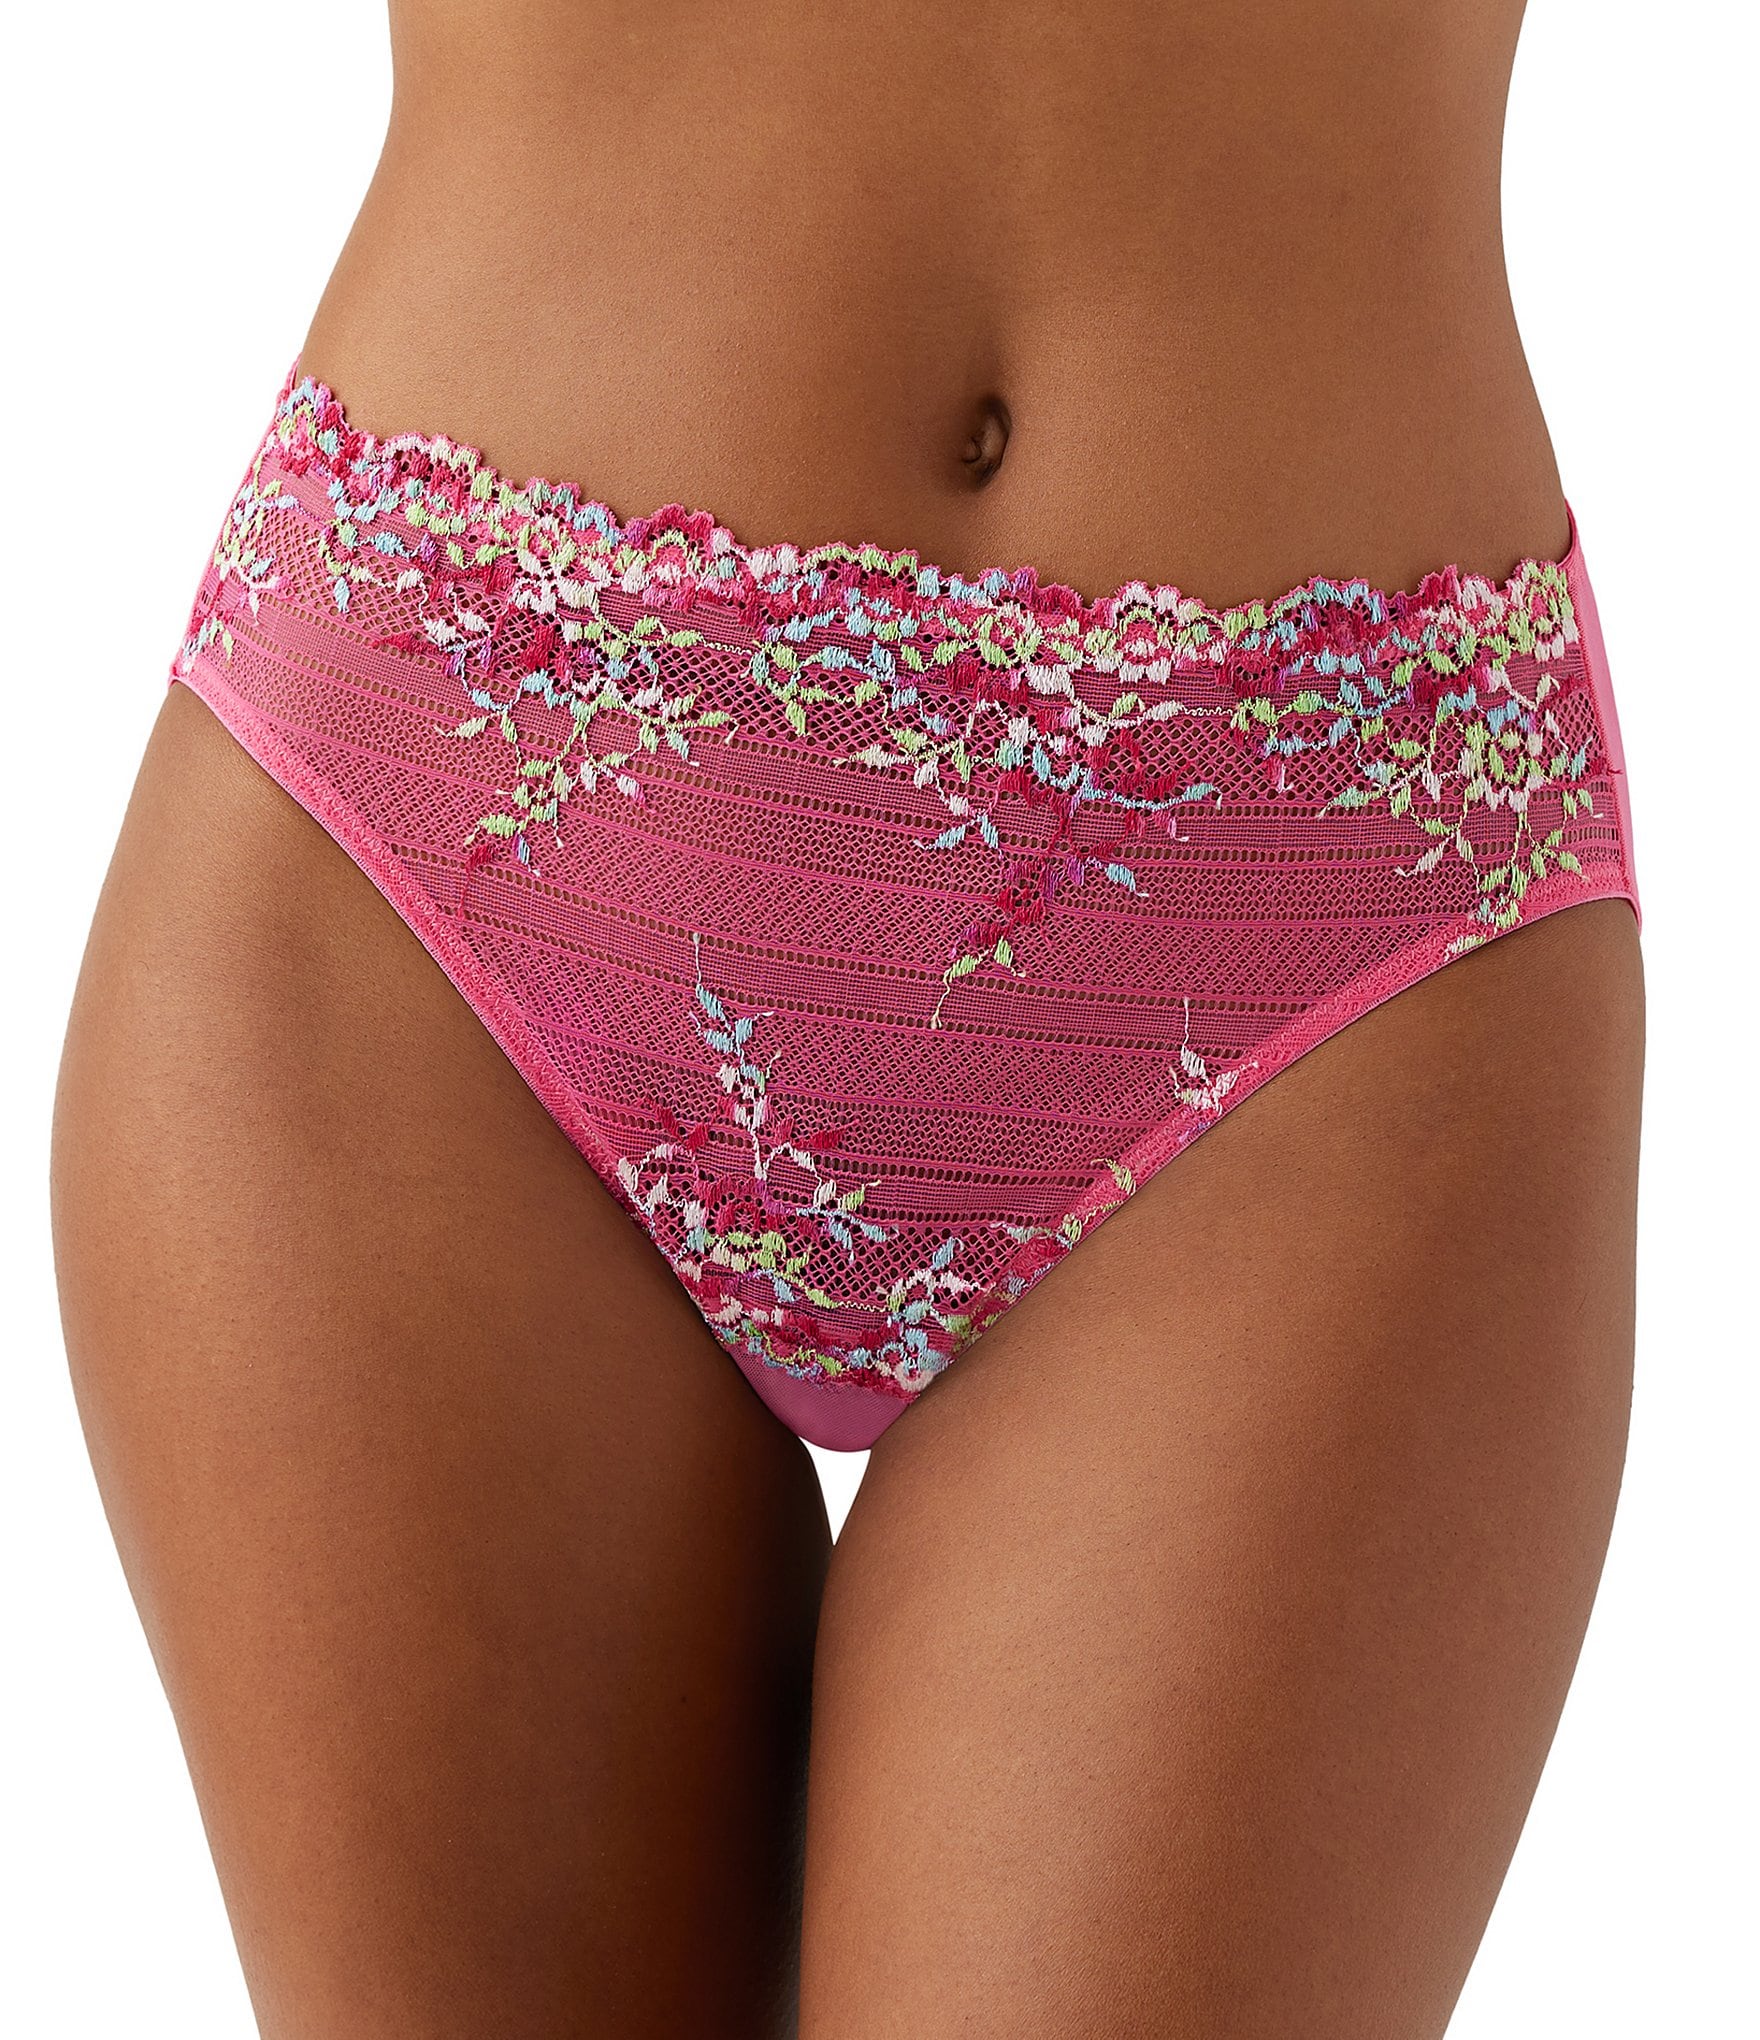 Wacoal Women's Comfort Touch Brief Panty, Baroque Rose, Small